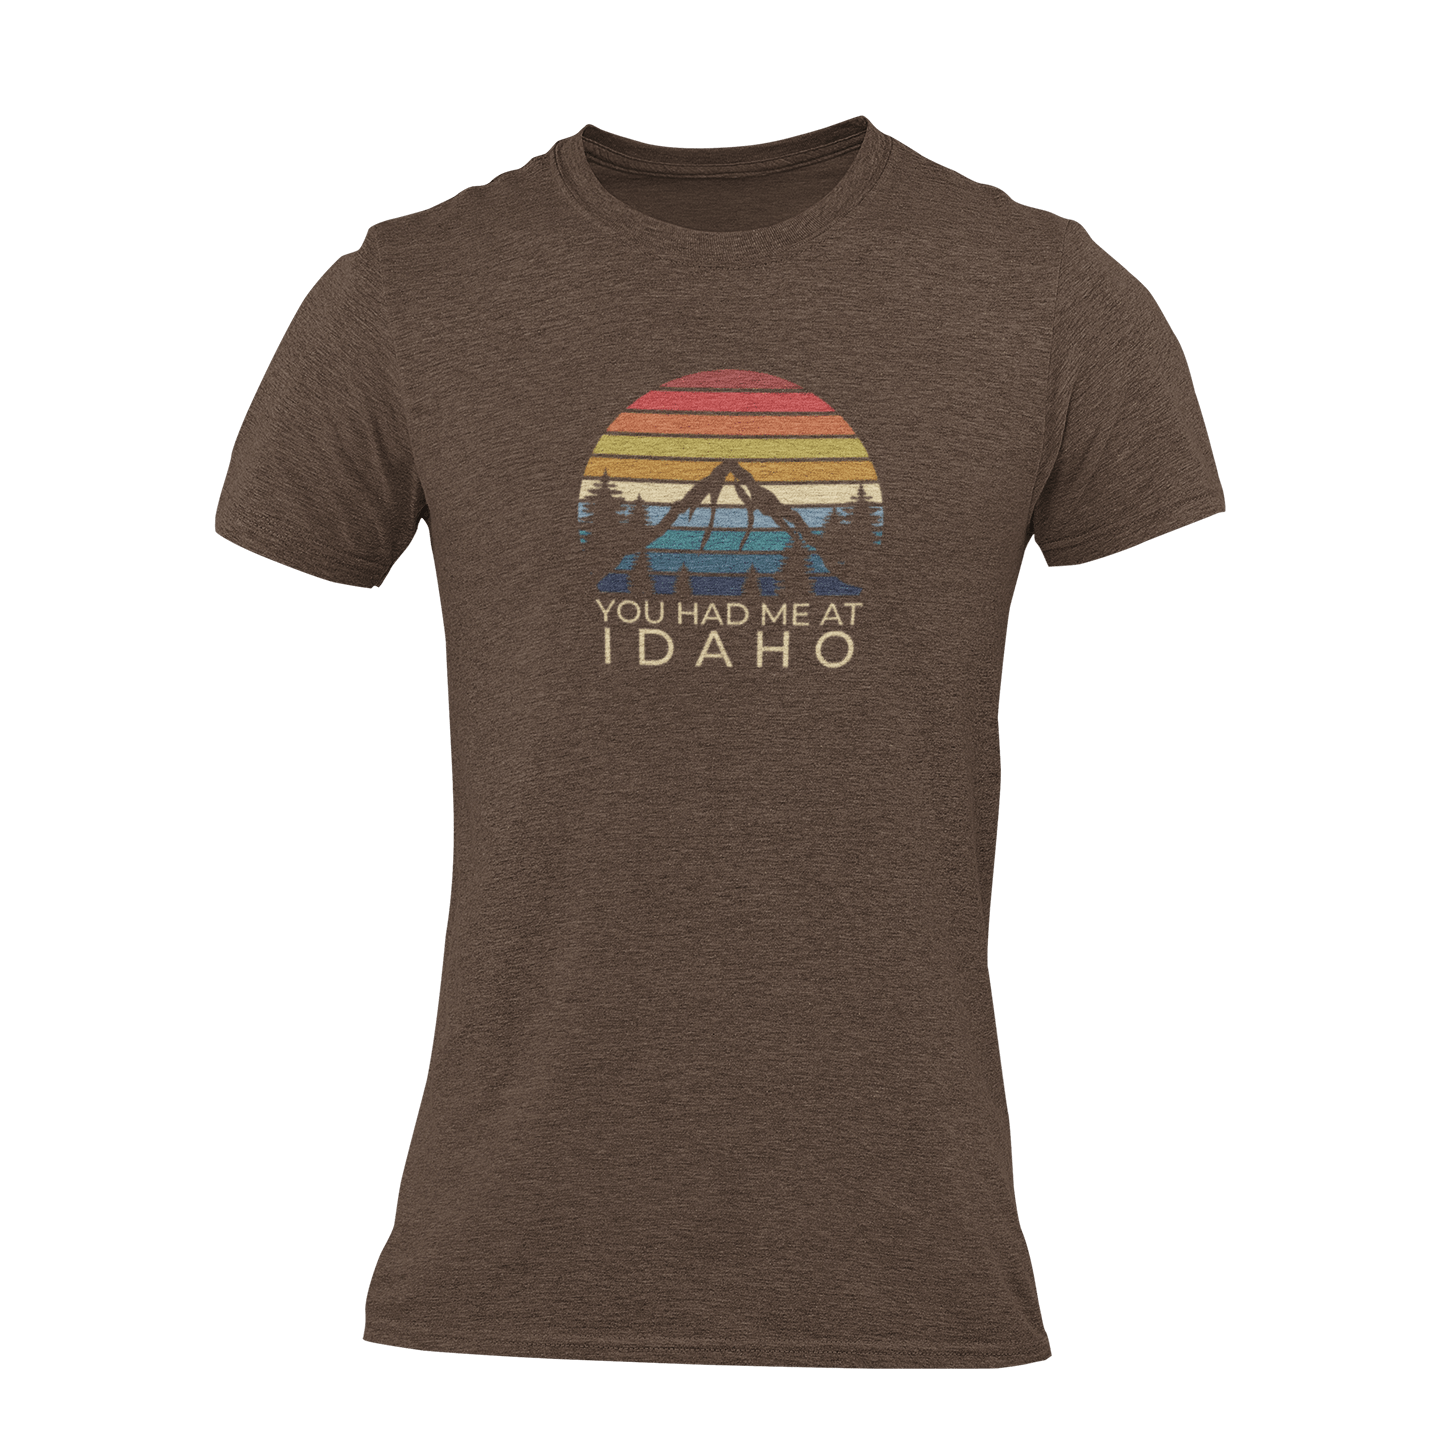 208 Supply Co Tees Small / Heather Brown Fall Stripes Unisex Tee (You Had Me At Idaho)